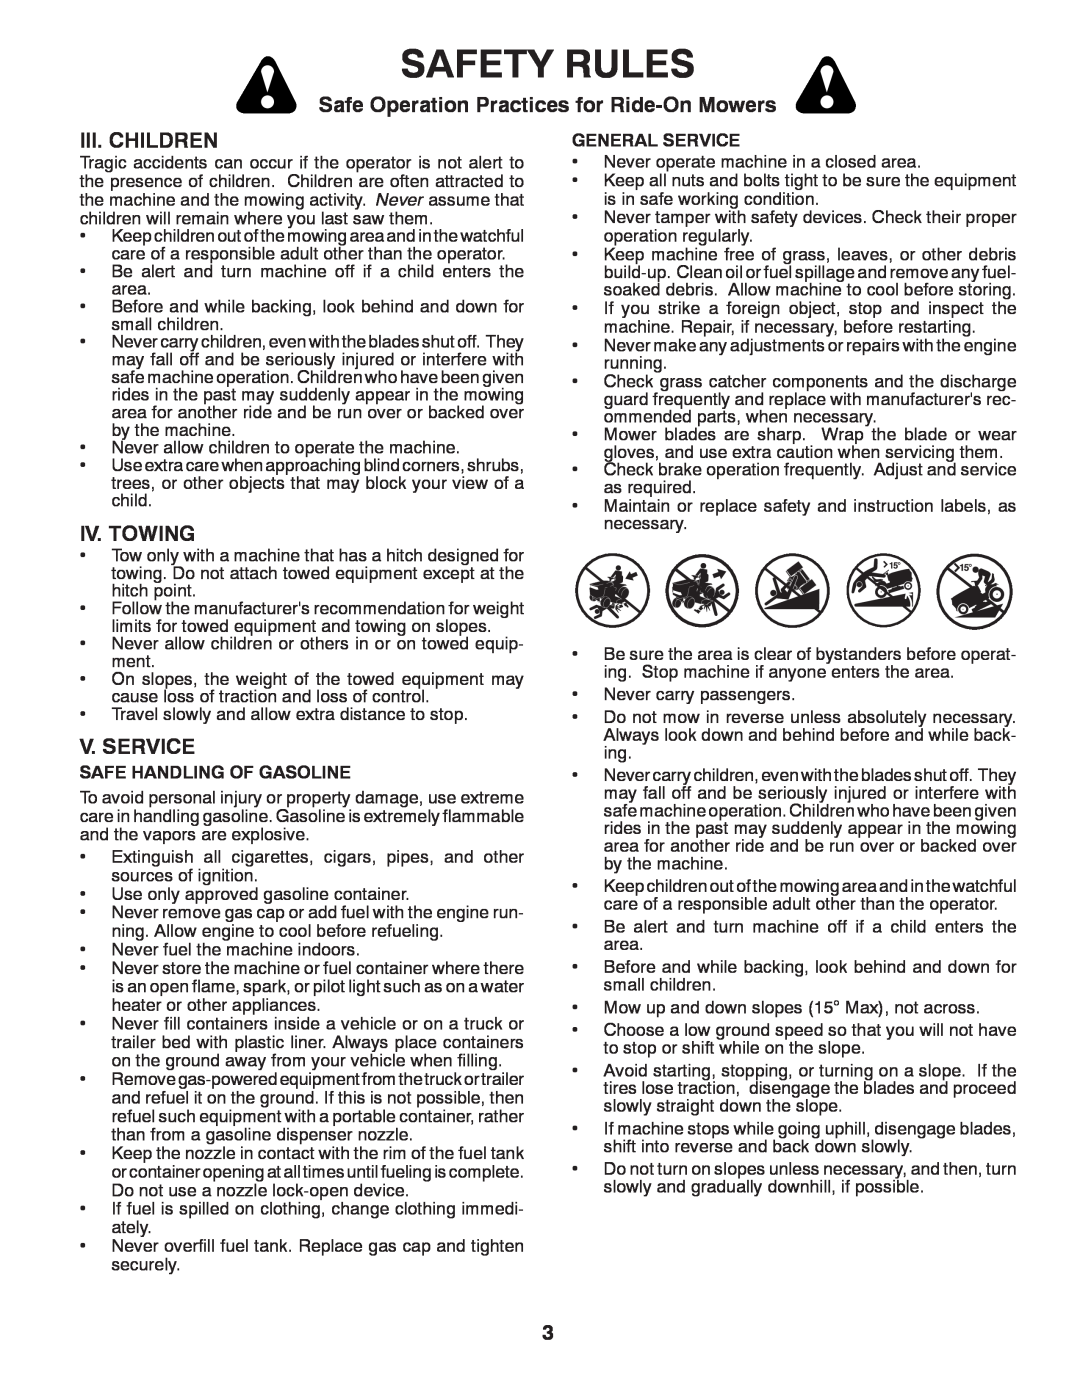 McCulloch 422800 manual Iii. Children, Iv. Towing, V. Service, Safety Rules, Safe Operation Practices for Ride-On Mowers 